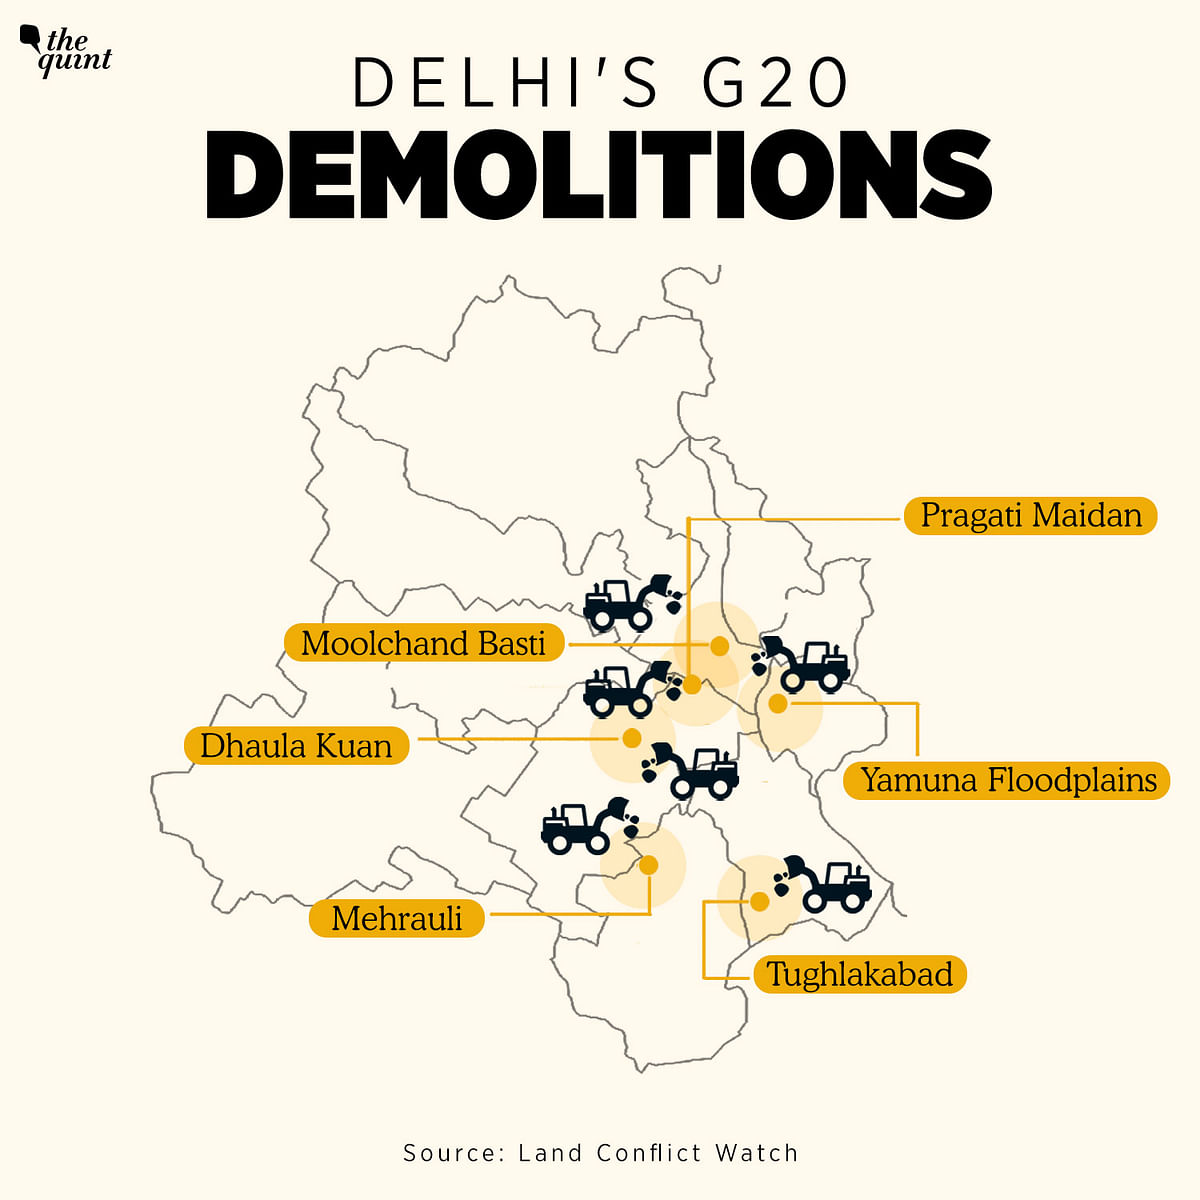 A large number of demolition drives in Delhi last year rendered many homeless. Will this impact the 25 May polls?